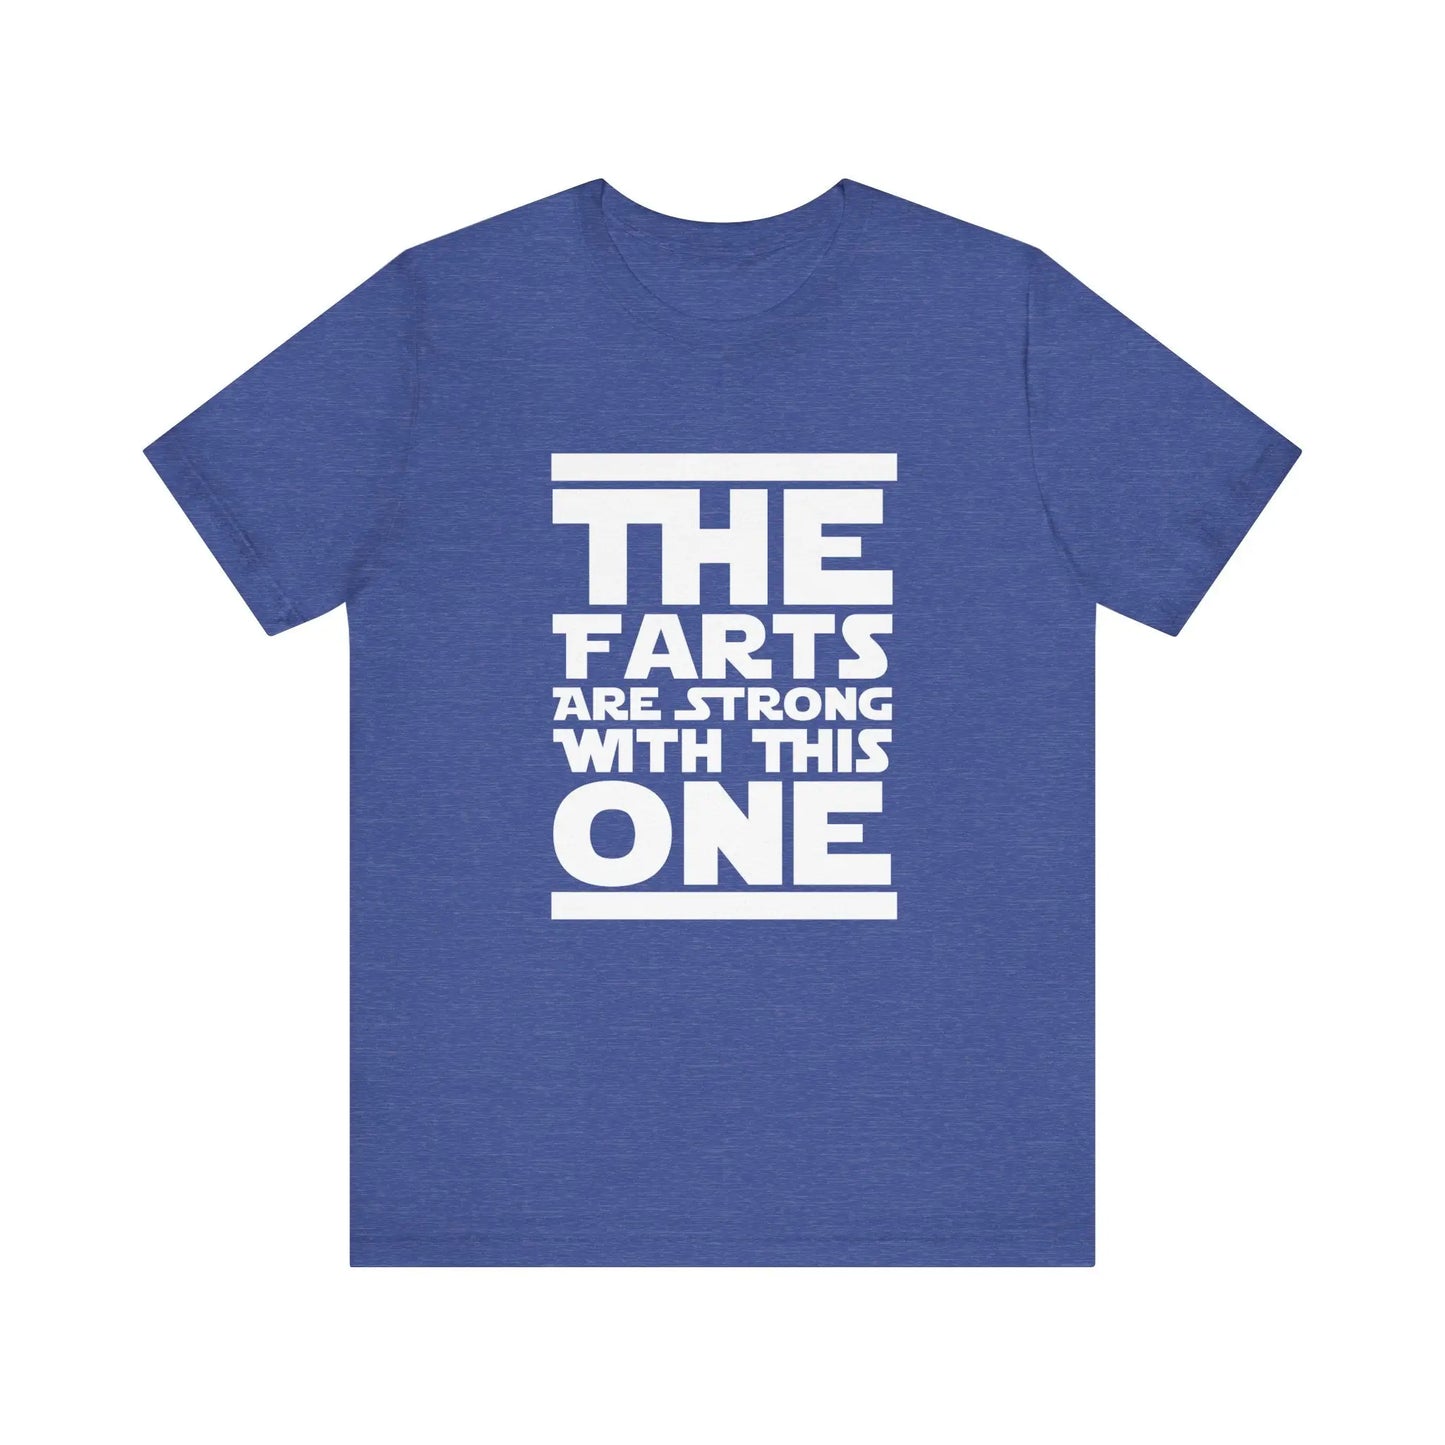 The Farts Are Strong With This One Men's Tee - Wicked Tees